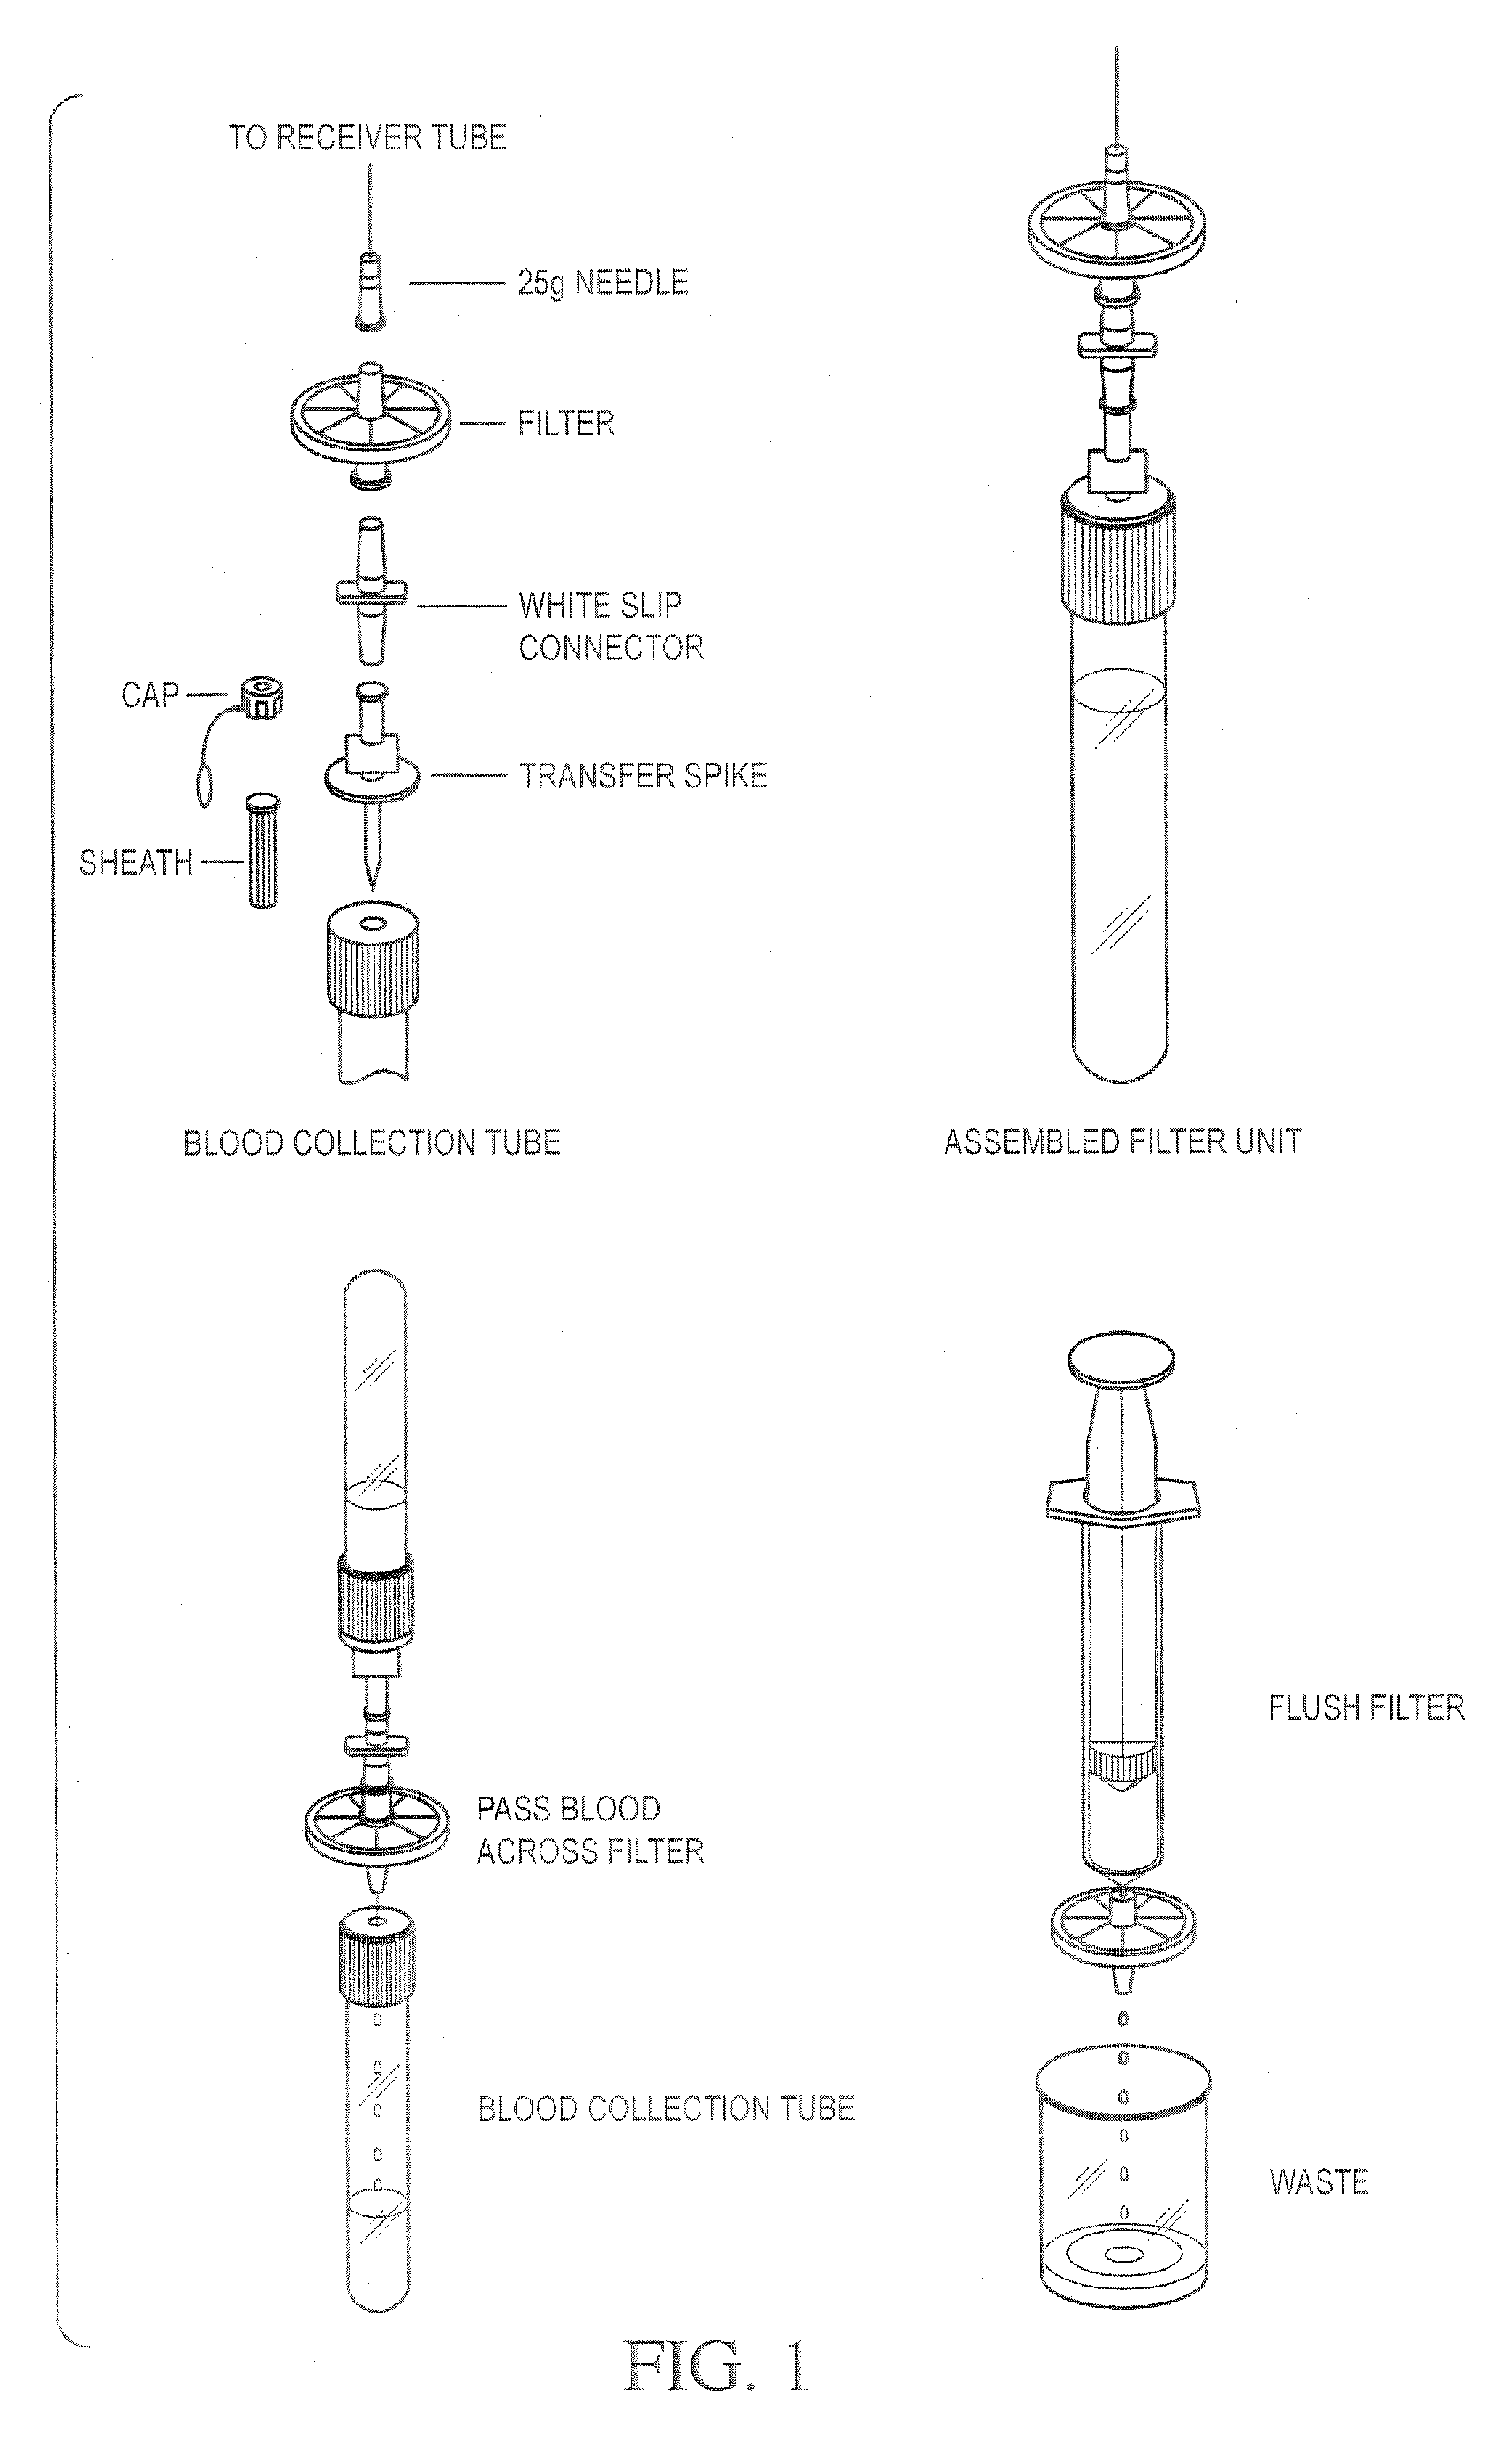 Methods and kits for sequentially isolating RNA and genomic DNA from cells